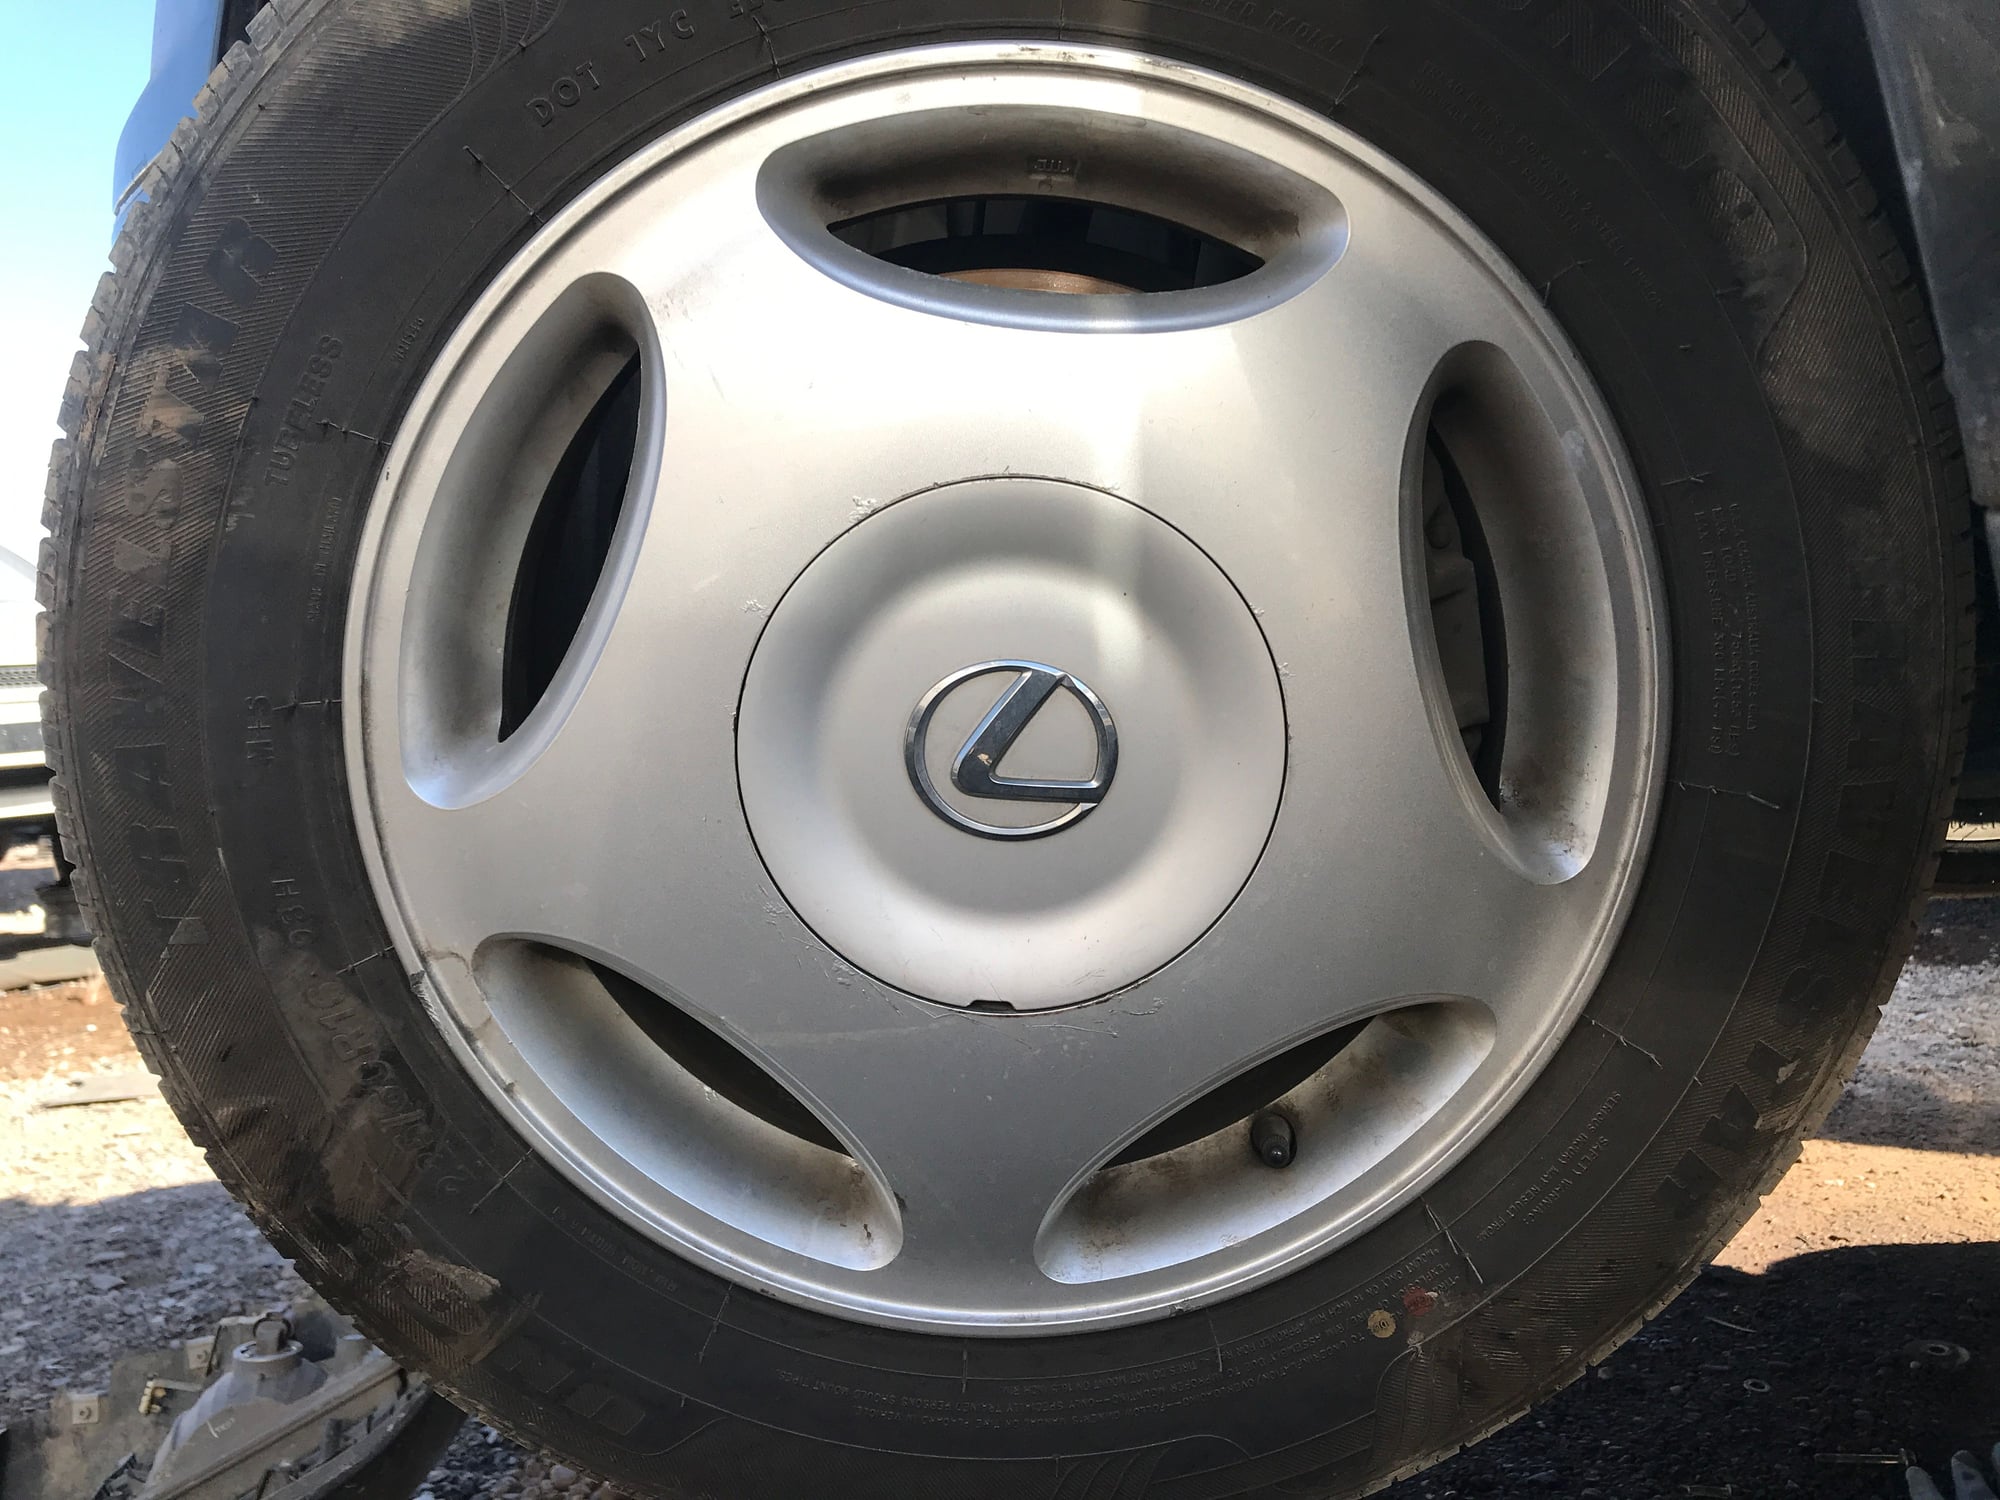 Wheels and Tires/Axles - 95-00 LS400 Center Caps Silver - Used - 1995 to 2000 Lexus LS400 - Chandler, AZ 85224, United States